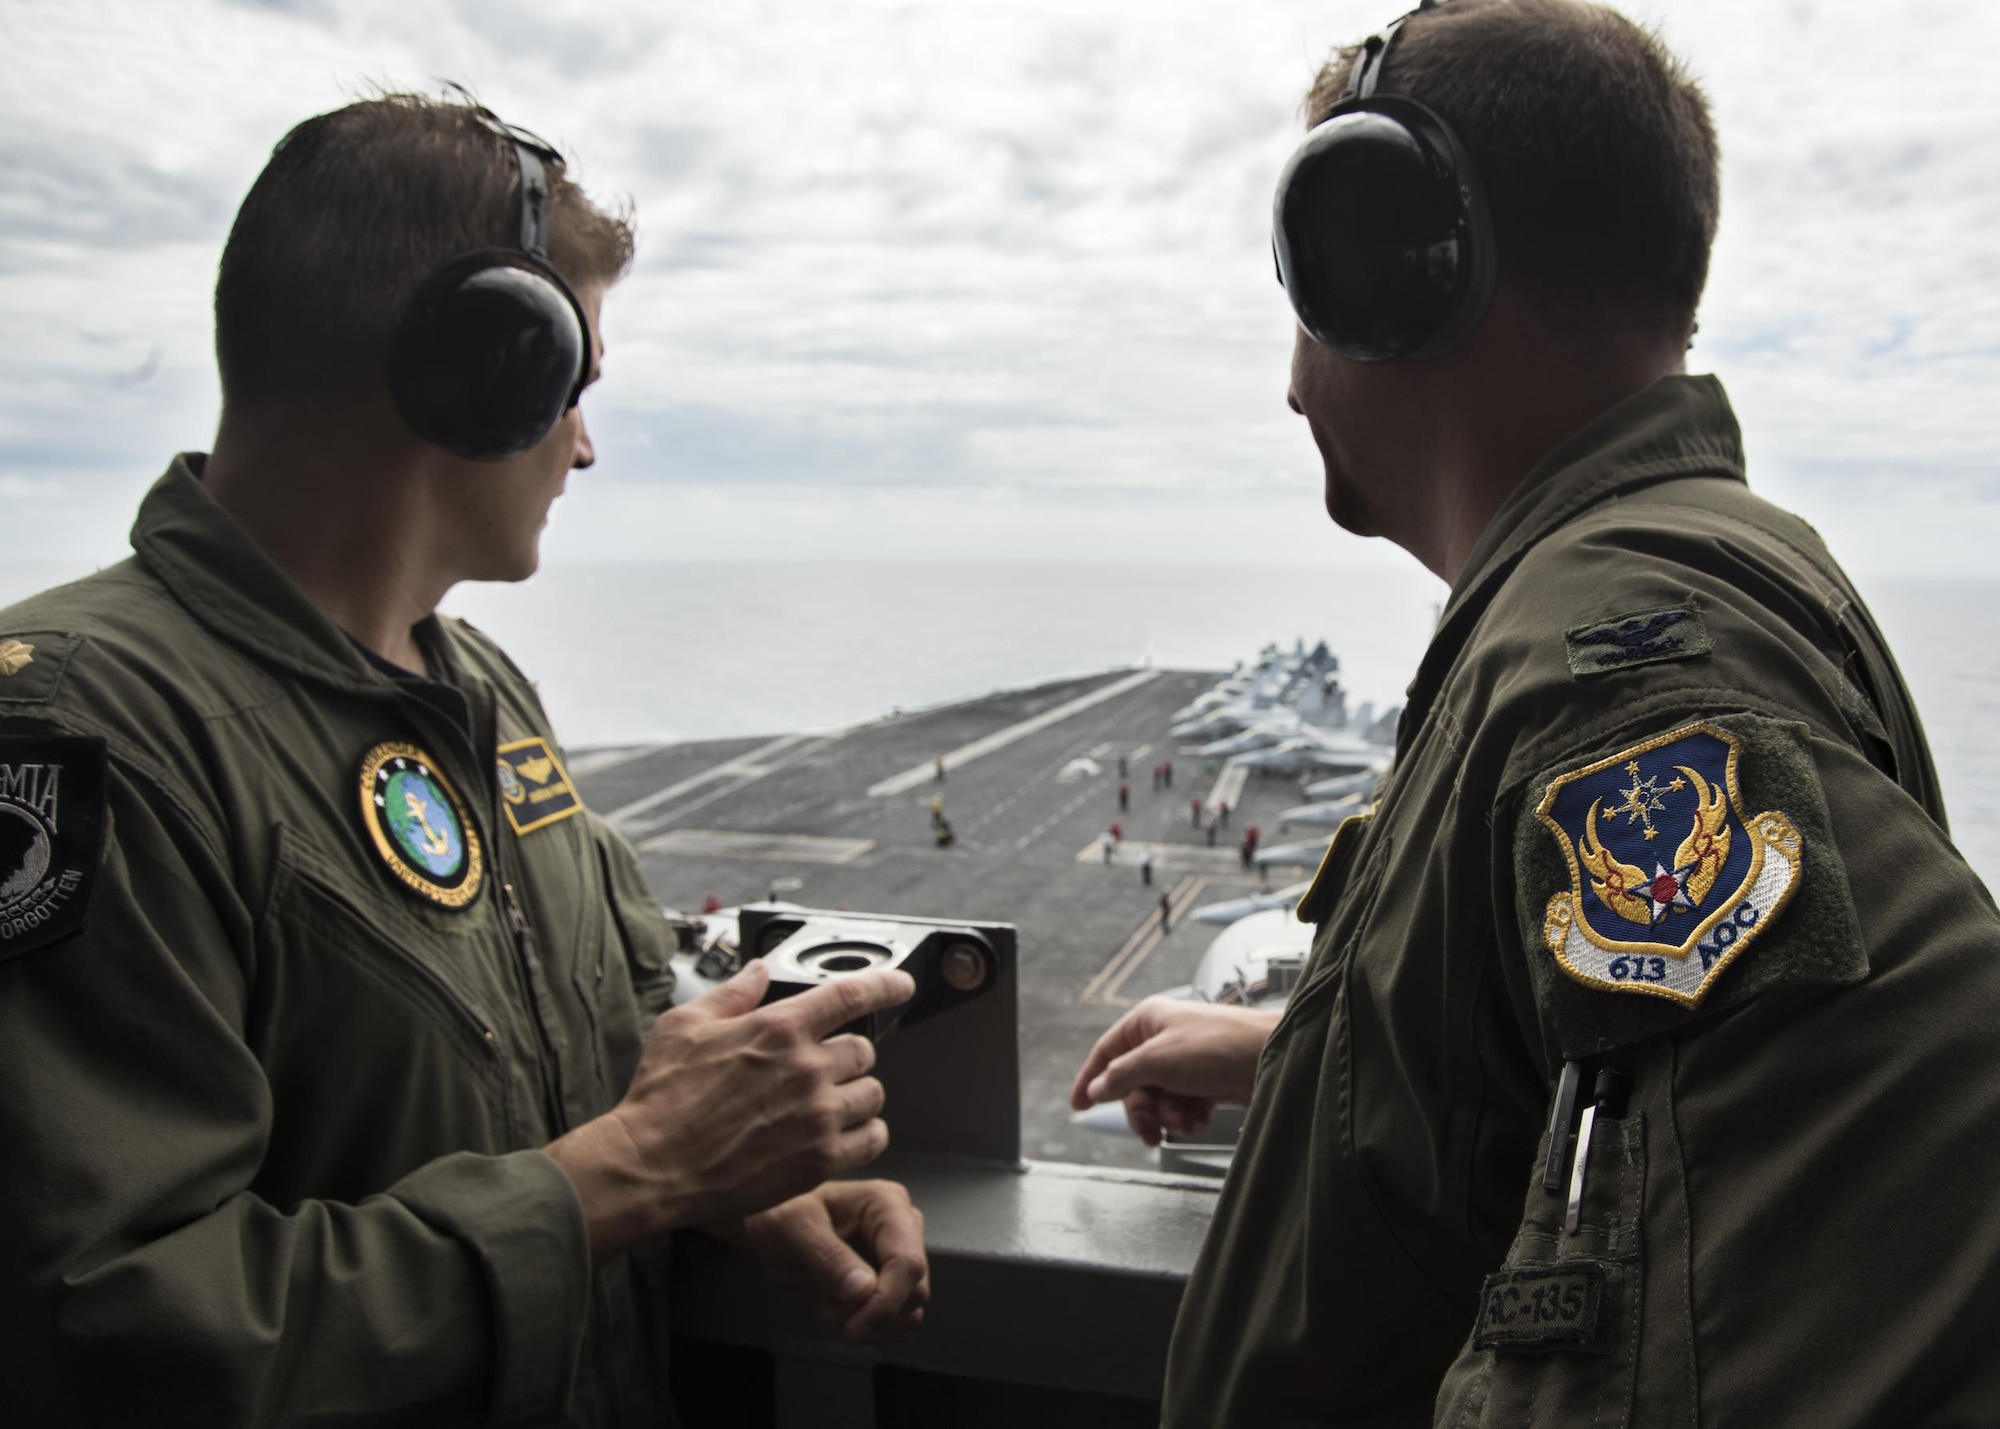 Lt. Cmdr. Jonathan Pohnel, left, Pacific Fleet Liaison Naval Officer, and U.S. Air Force Col. Doug Rice, Chief of the Combat Plans Division at 613th Air Operations Center (AOC), Joint Base Pearl Harbor-Hickam, Hawaii, view flight operations on the aircraft carrier USS Carl Vinson (CVN 70). A four-member team of representatives from the AOC joined the crew of USS Carl Vinson to help bridge the efforts between the AOC and Navy Units while transiting the Pacific area of responsibility. The Carl Vinson Carrier Strike Group is on a regularly scheduled Western Pacific deployment as part of the U.S. Pacific Fleet-led initiative to extend the command and control functions of U.S. 3rd Fleet. U.S Navy aircraft carrier strike groups have patrolled the Indo-Asia-Pacific regularly and routinely for more than 70 years. (U.S. Navy Photo by Seaman Jake Cannady)